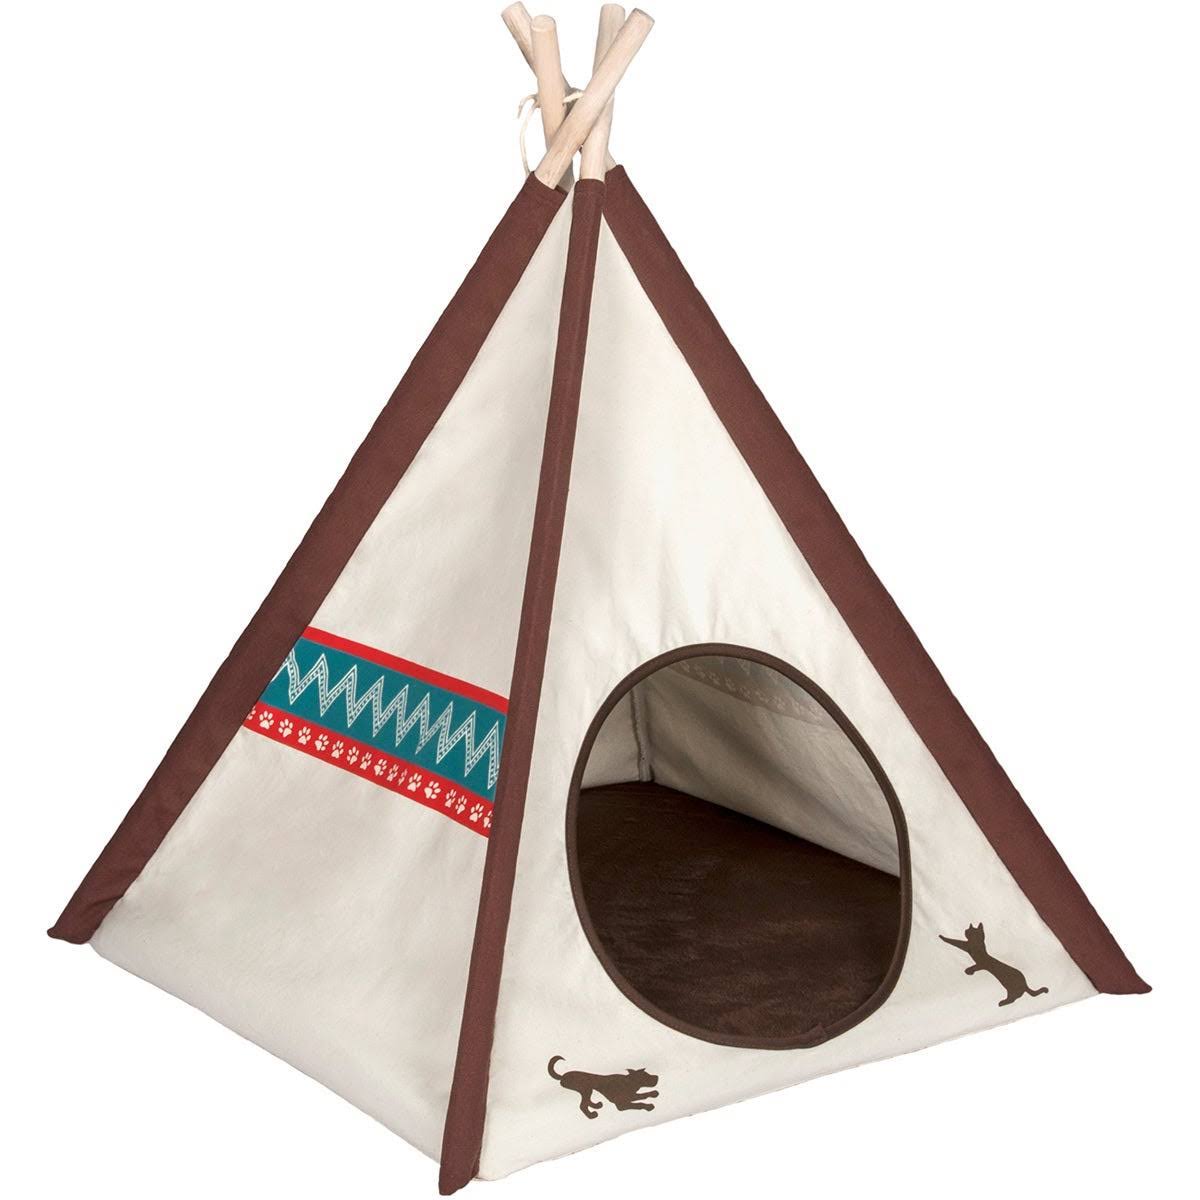 P.L.A.Y. Teepee Tent Classic